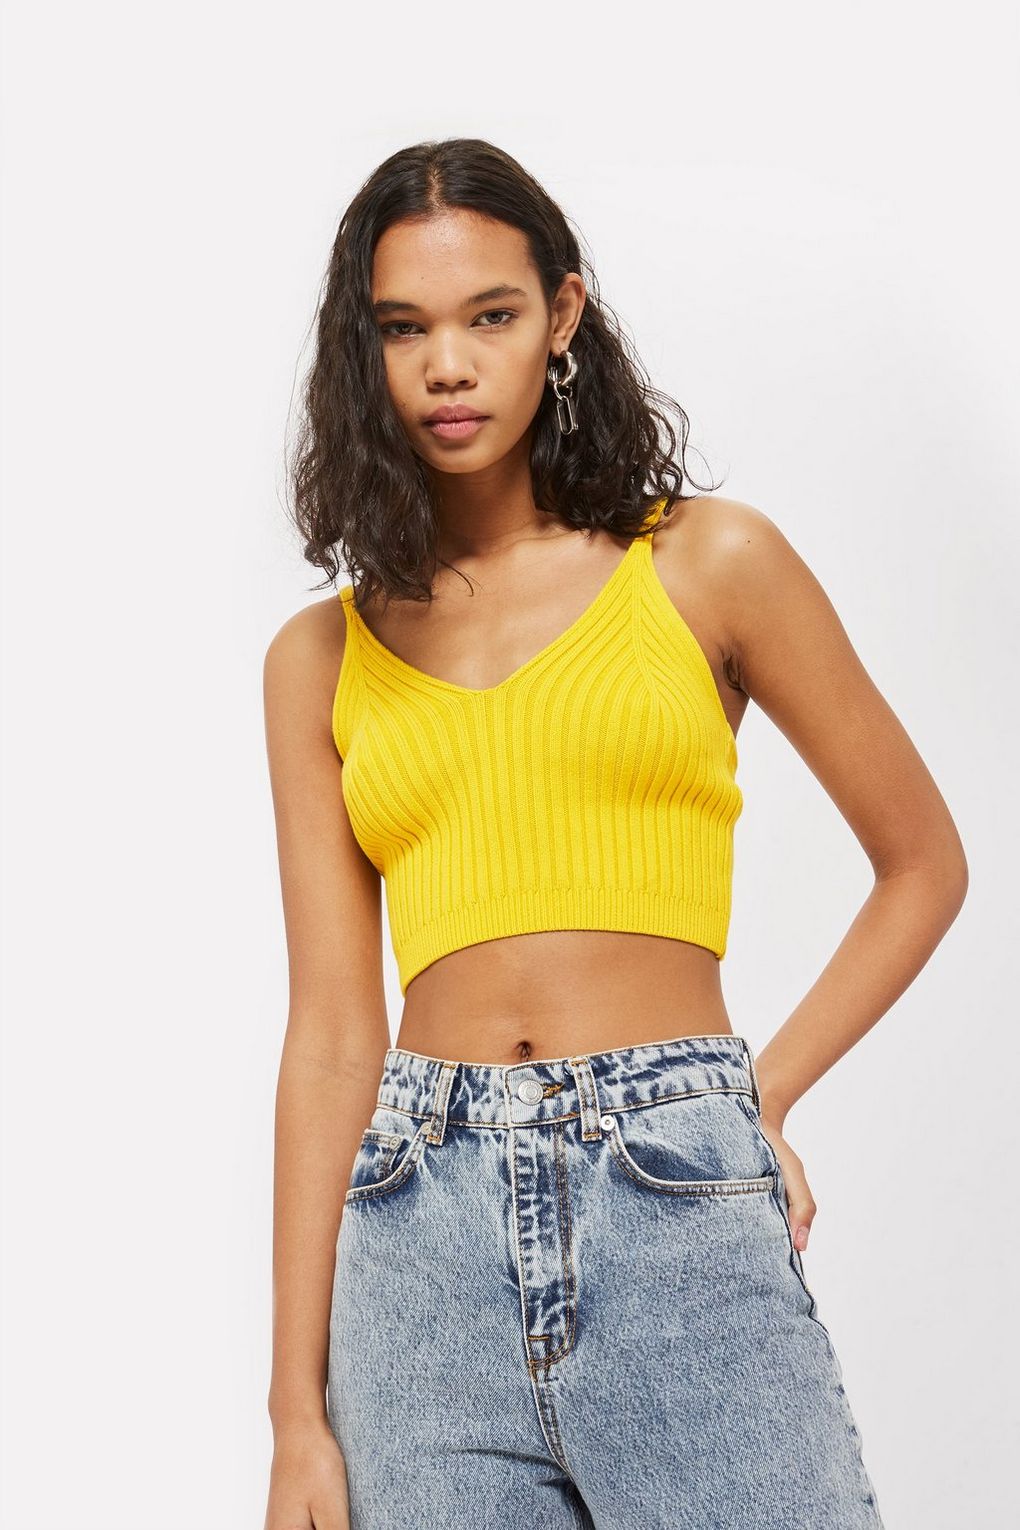 90s-Inspired Spaghetti-Strap Tank Tops Are Back for 2018 - theFashionSpot